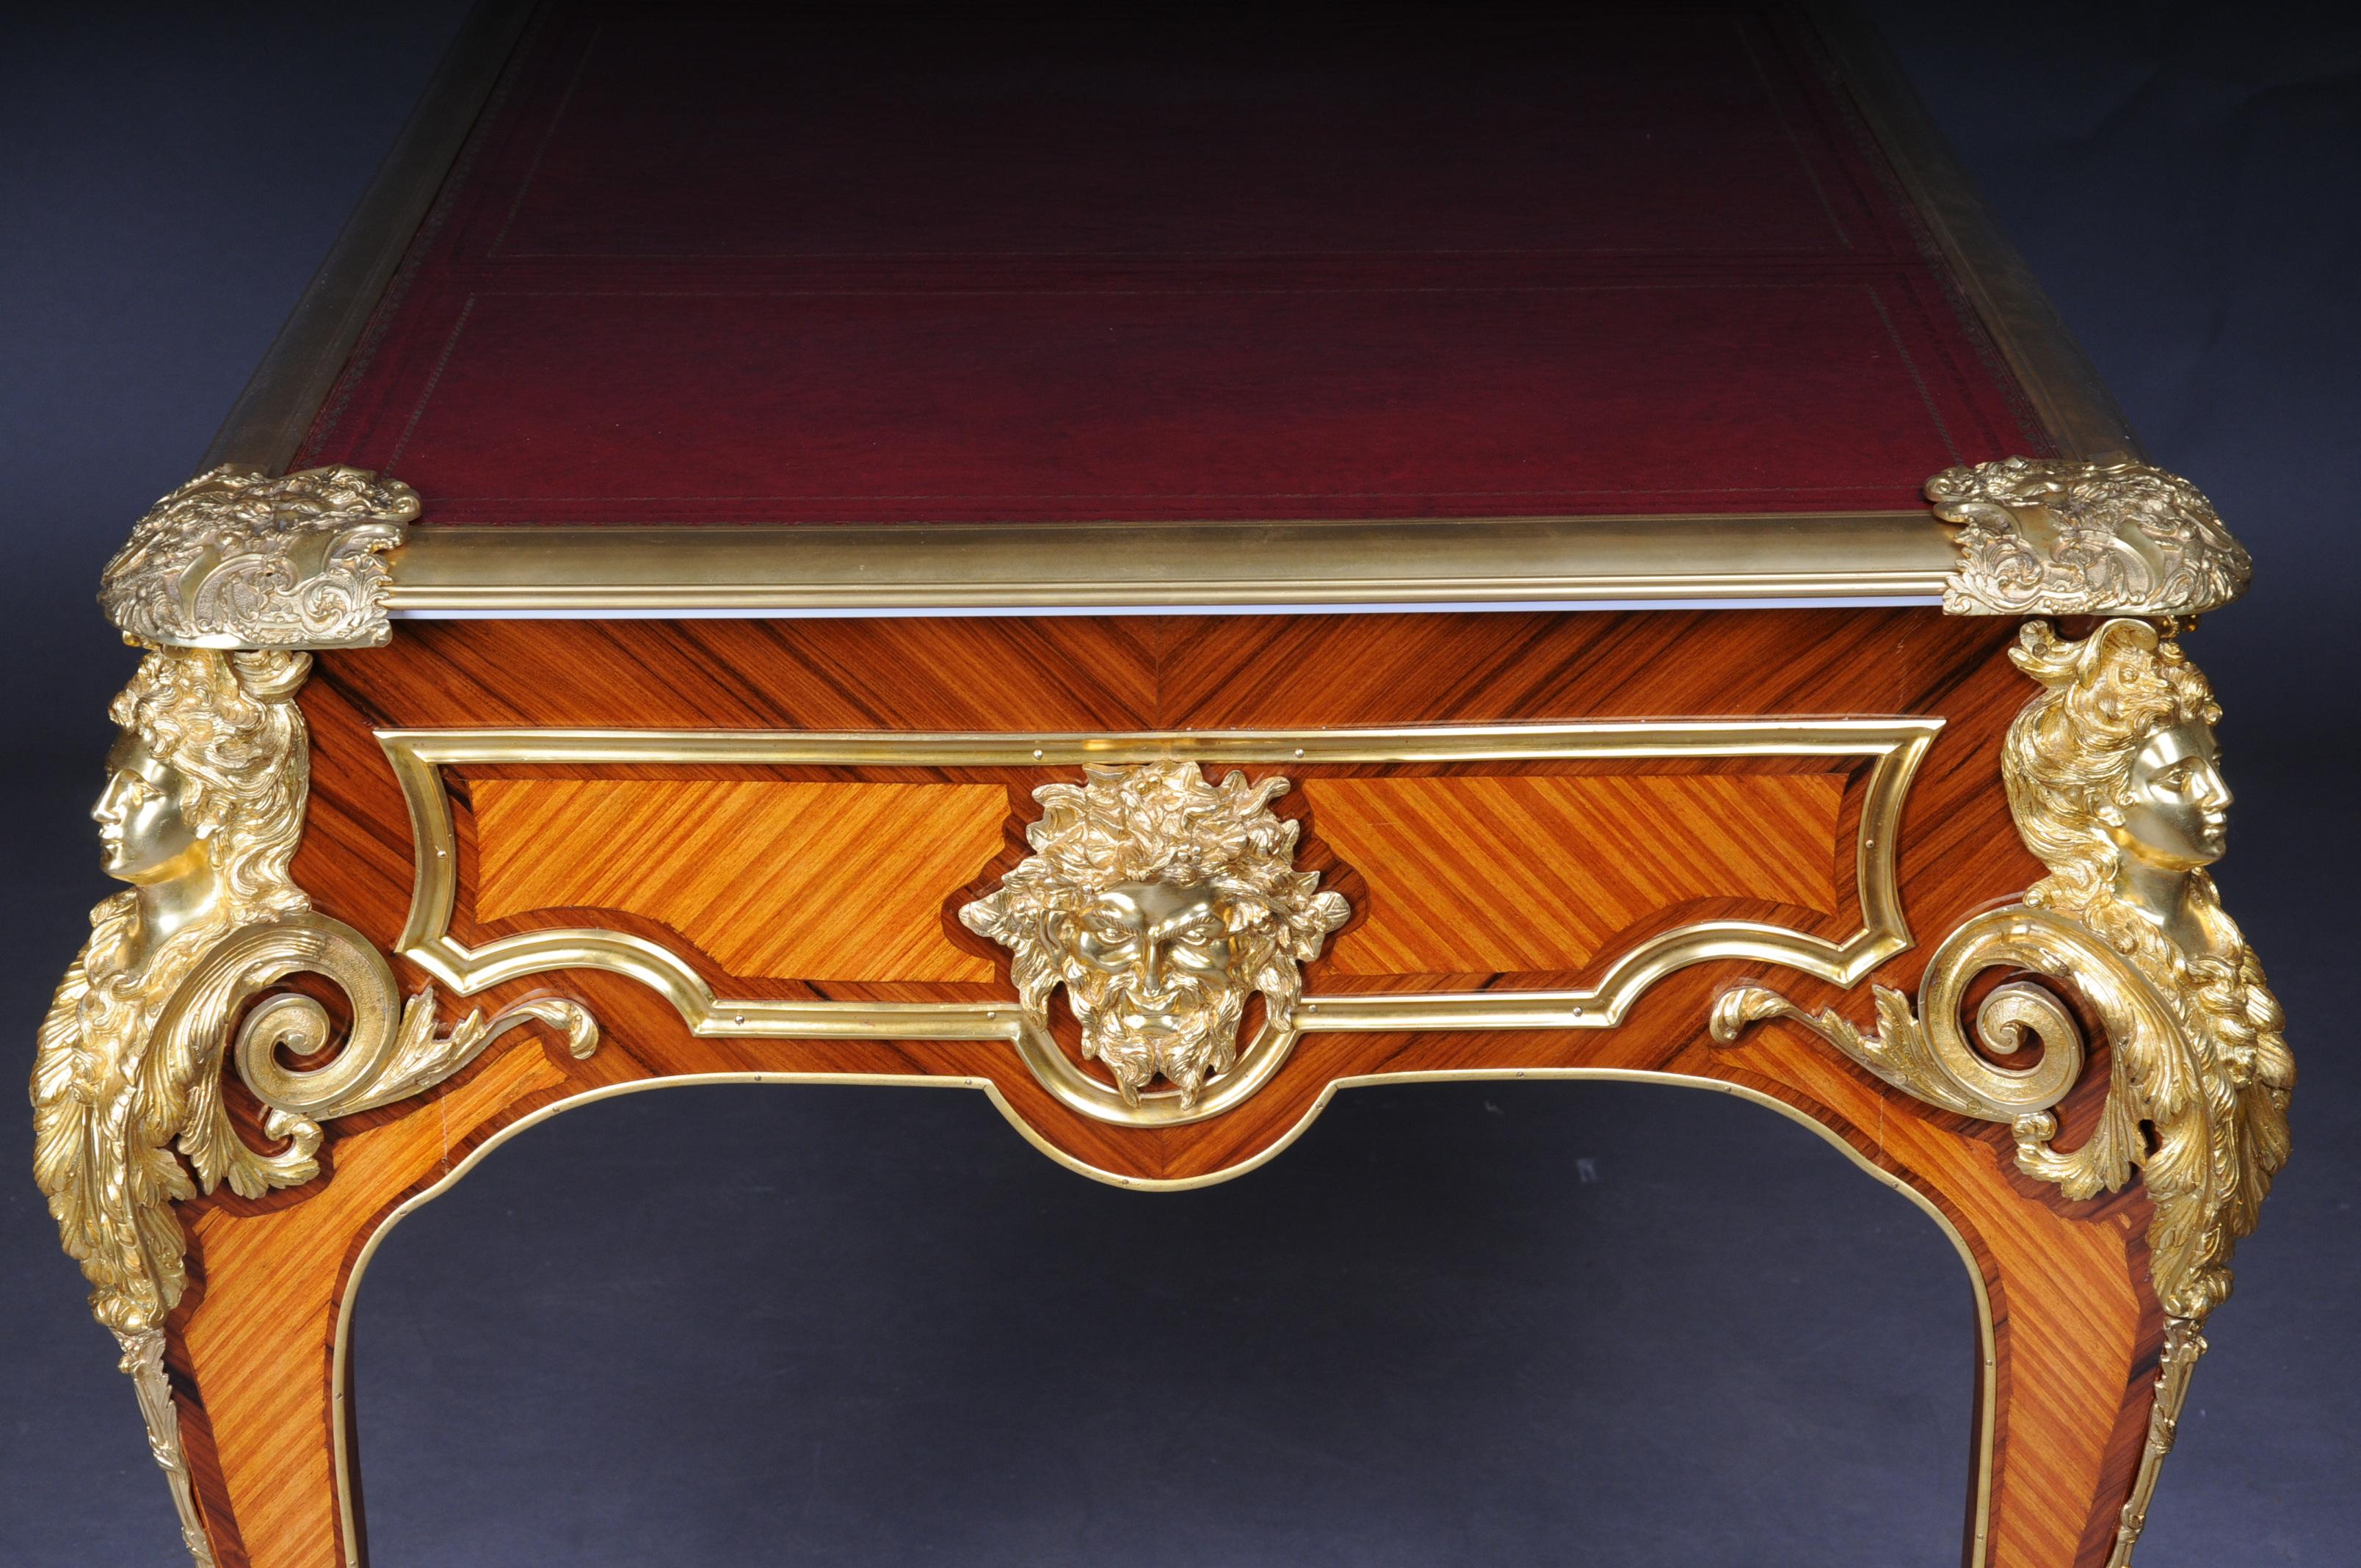 20th Century Bureau Plat or Desk by the Model of Andre Charles Boulle For Sale 4